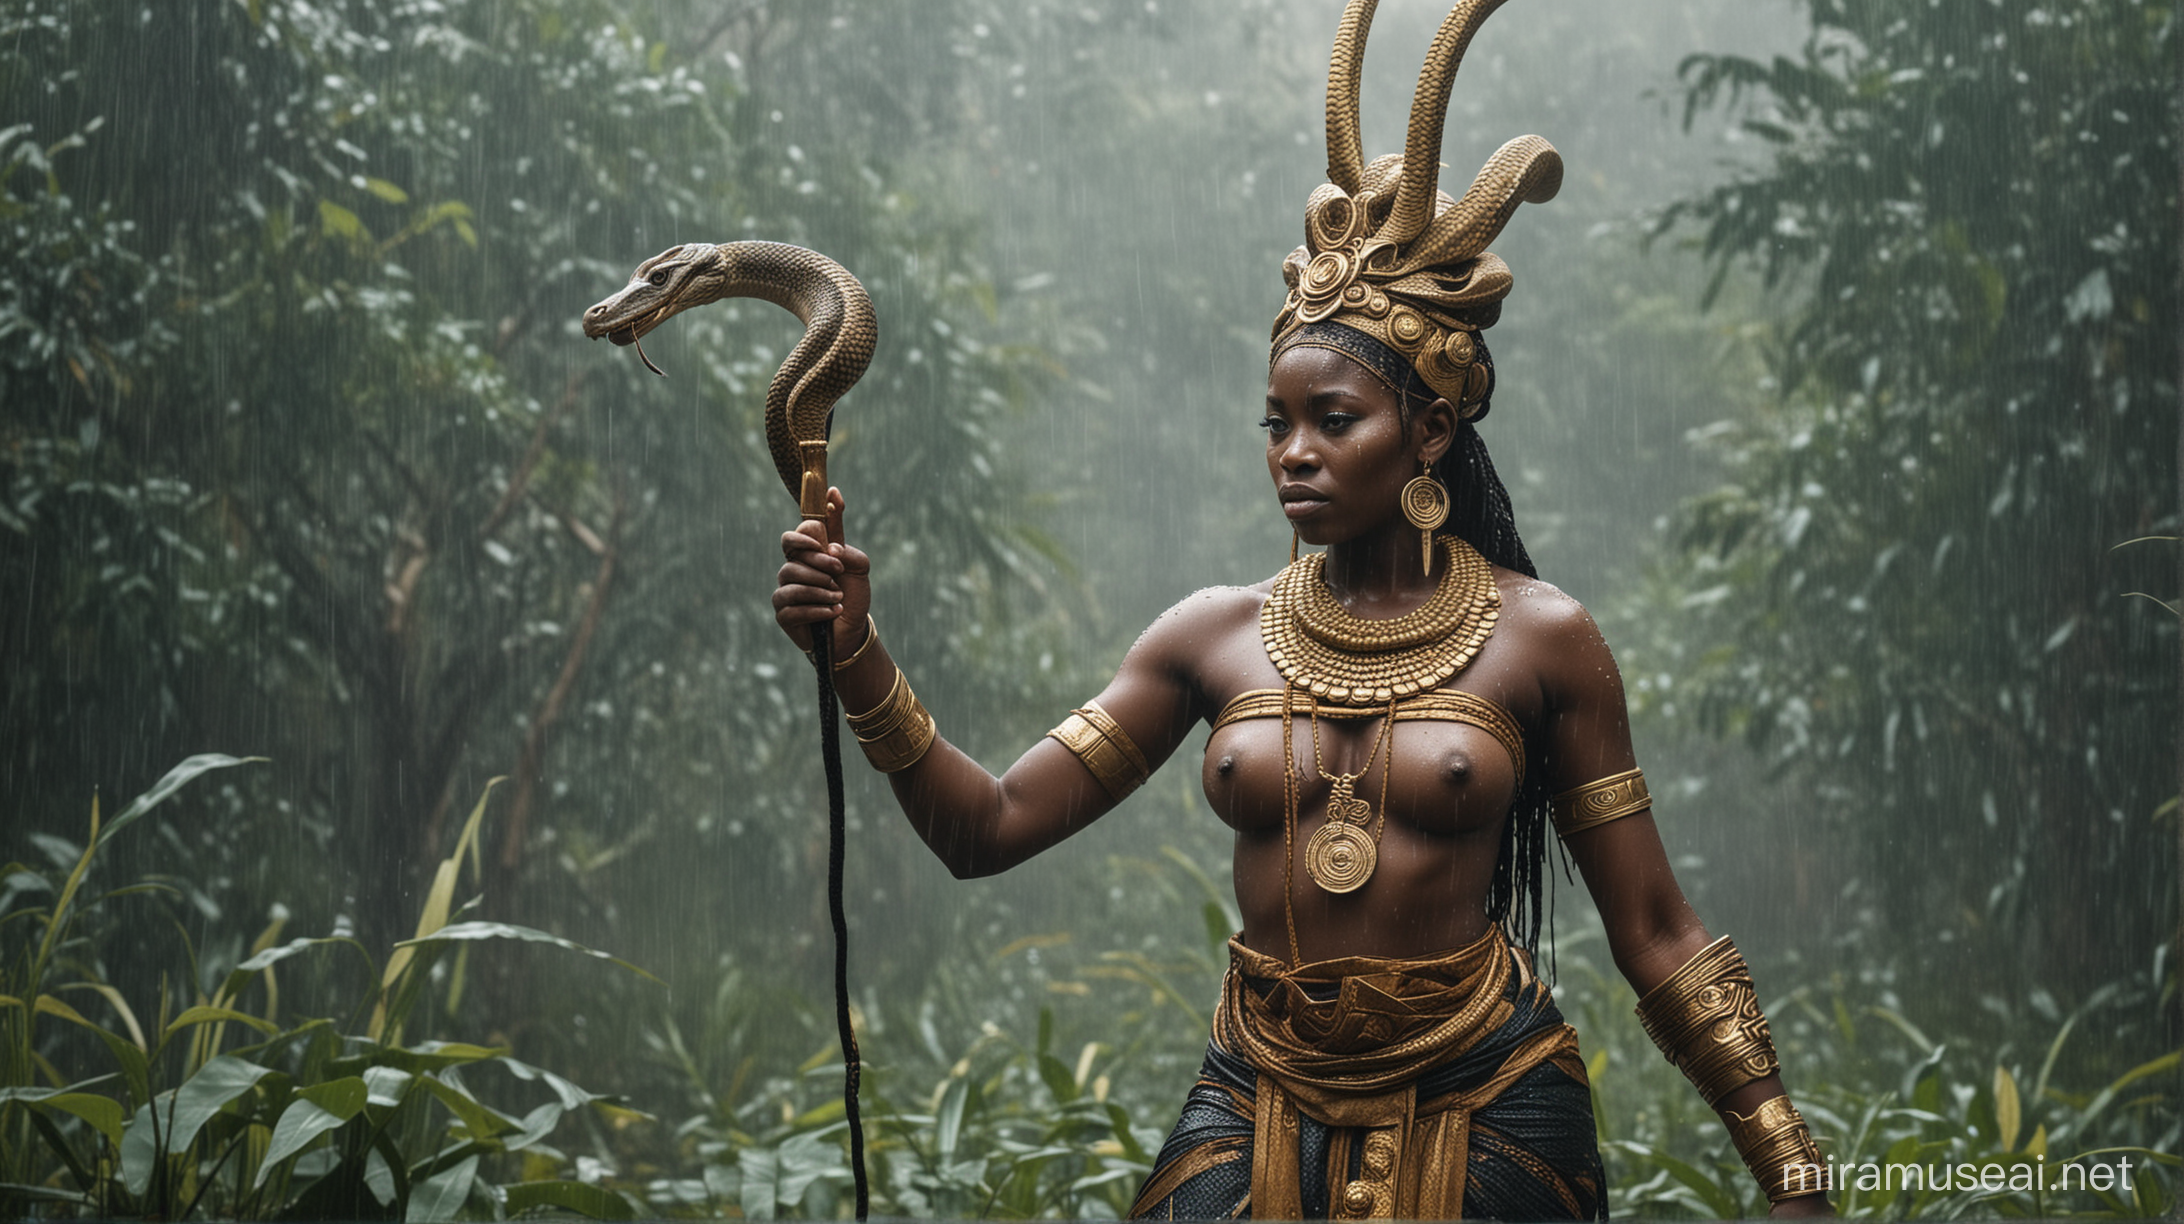 In the land of Umuweze, there lived a powerful god known as Ogidi, the god of rain. Ogidi was a wicked deity with the power of a snake, and she was constantly at odds with her sister, Oshimiri, the goddess of peace and prosperity. 